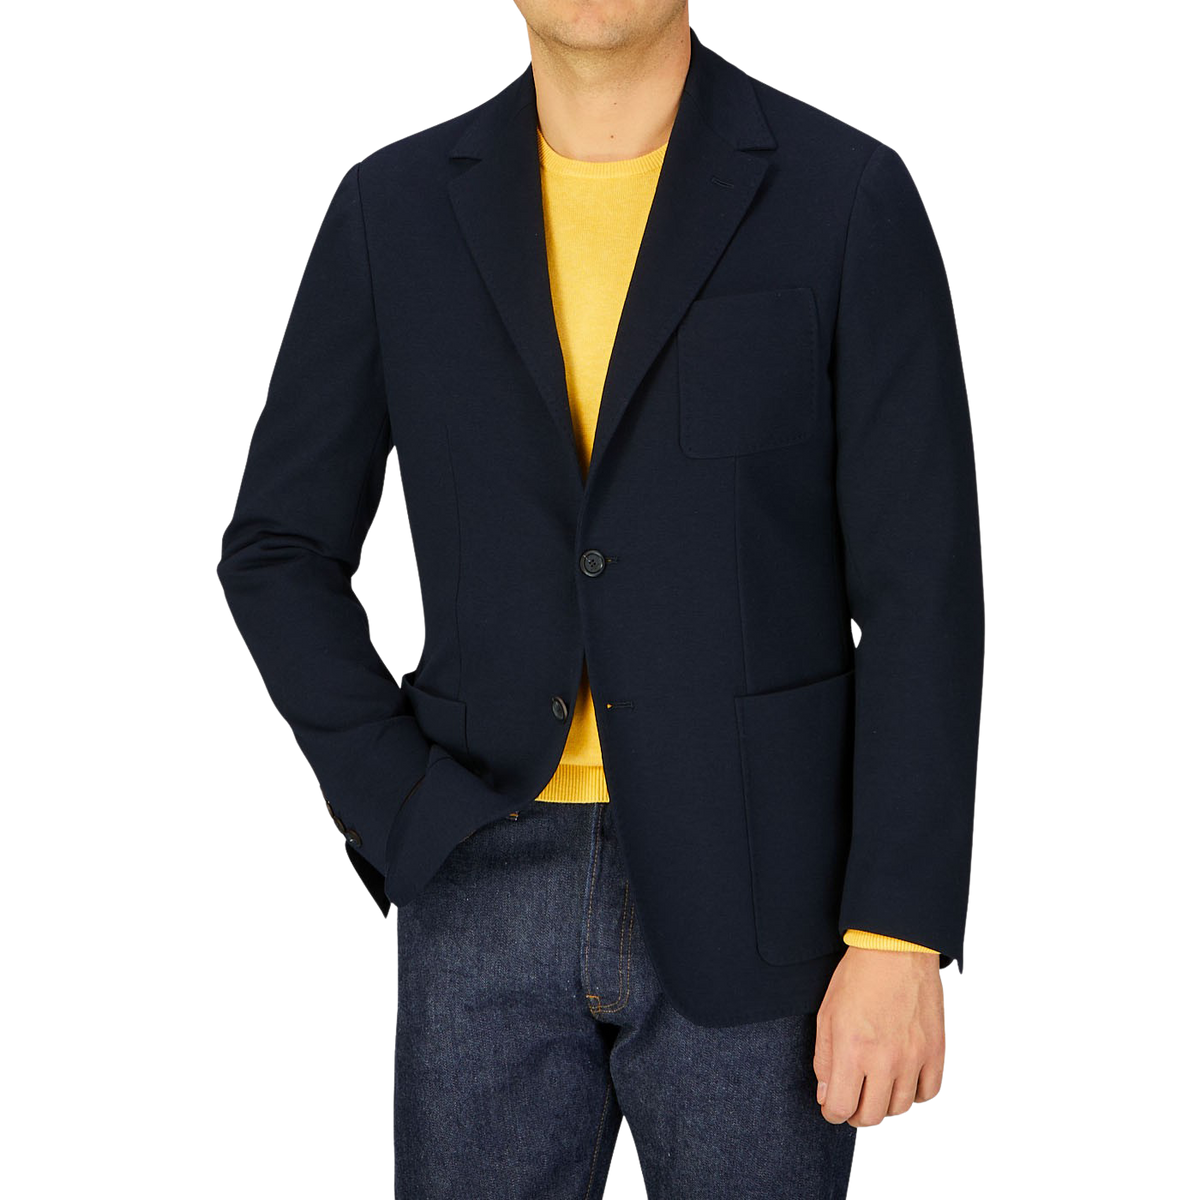 Man wearing a Canali navy cotton jersey unconstructed blazer over a yellow shirt paired with blue jeans.